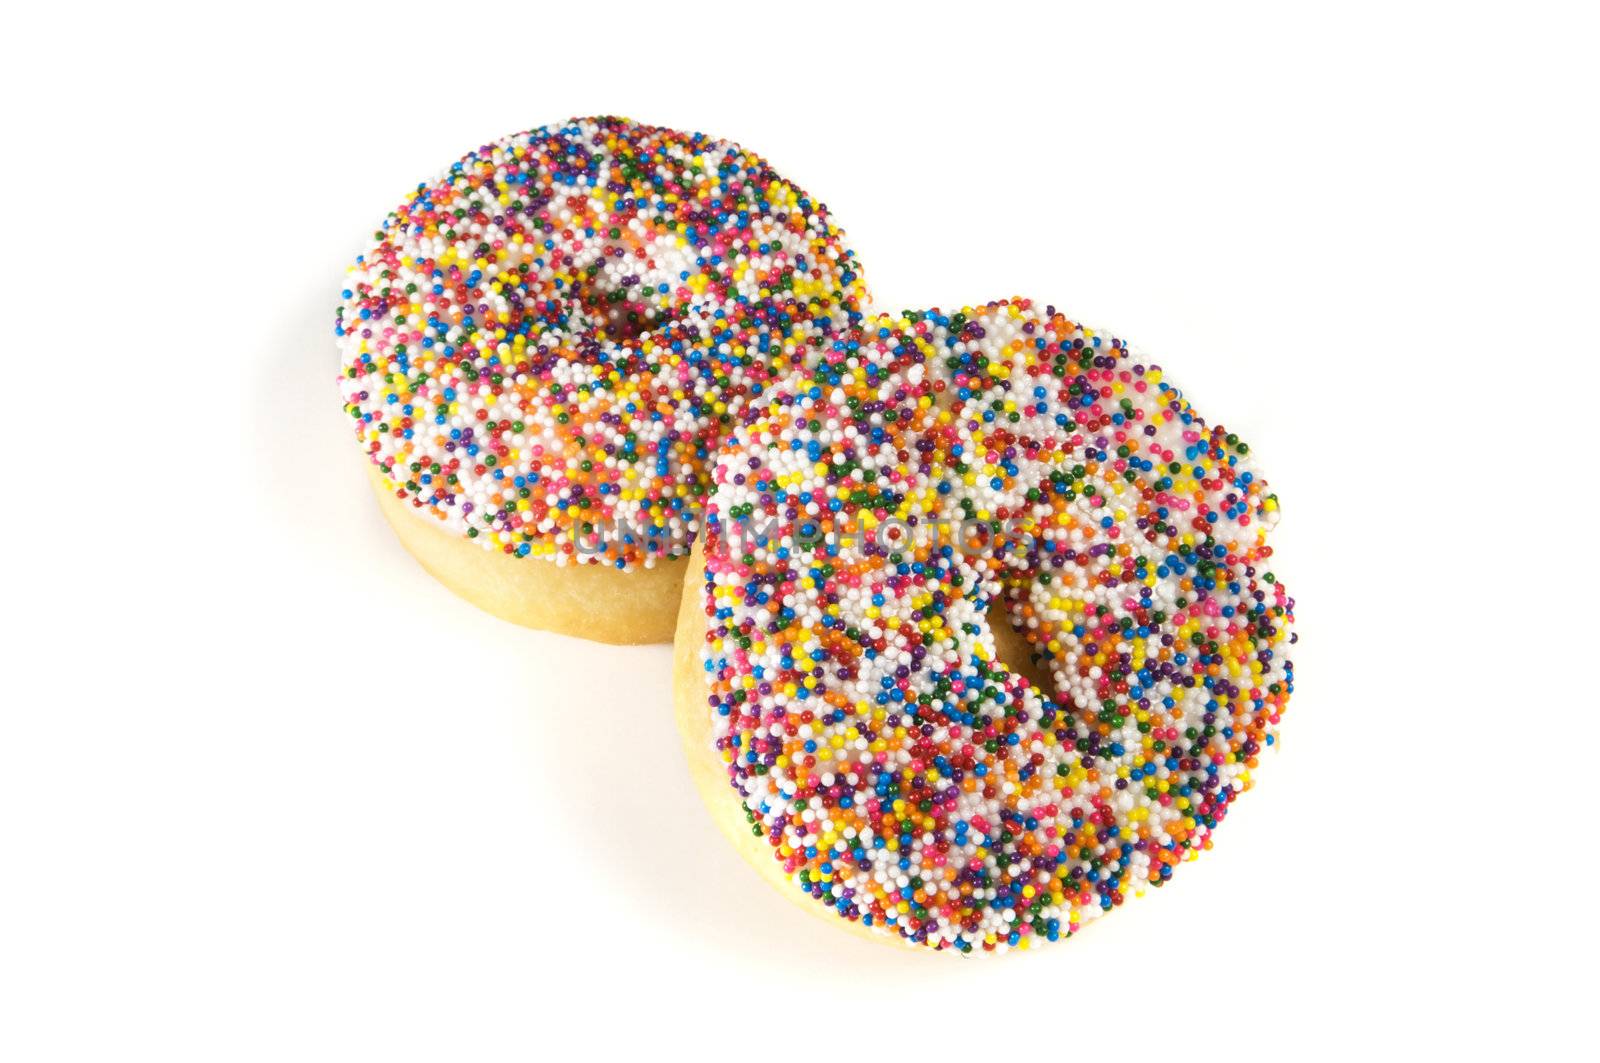 Sprinkles covered donuts isolated on a white background